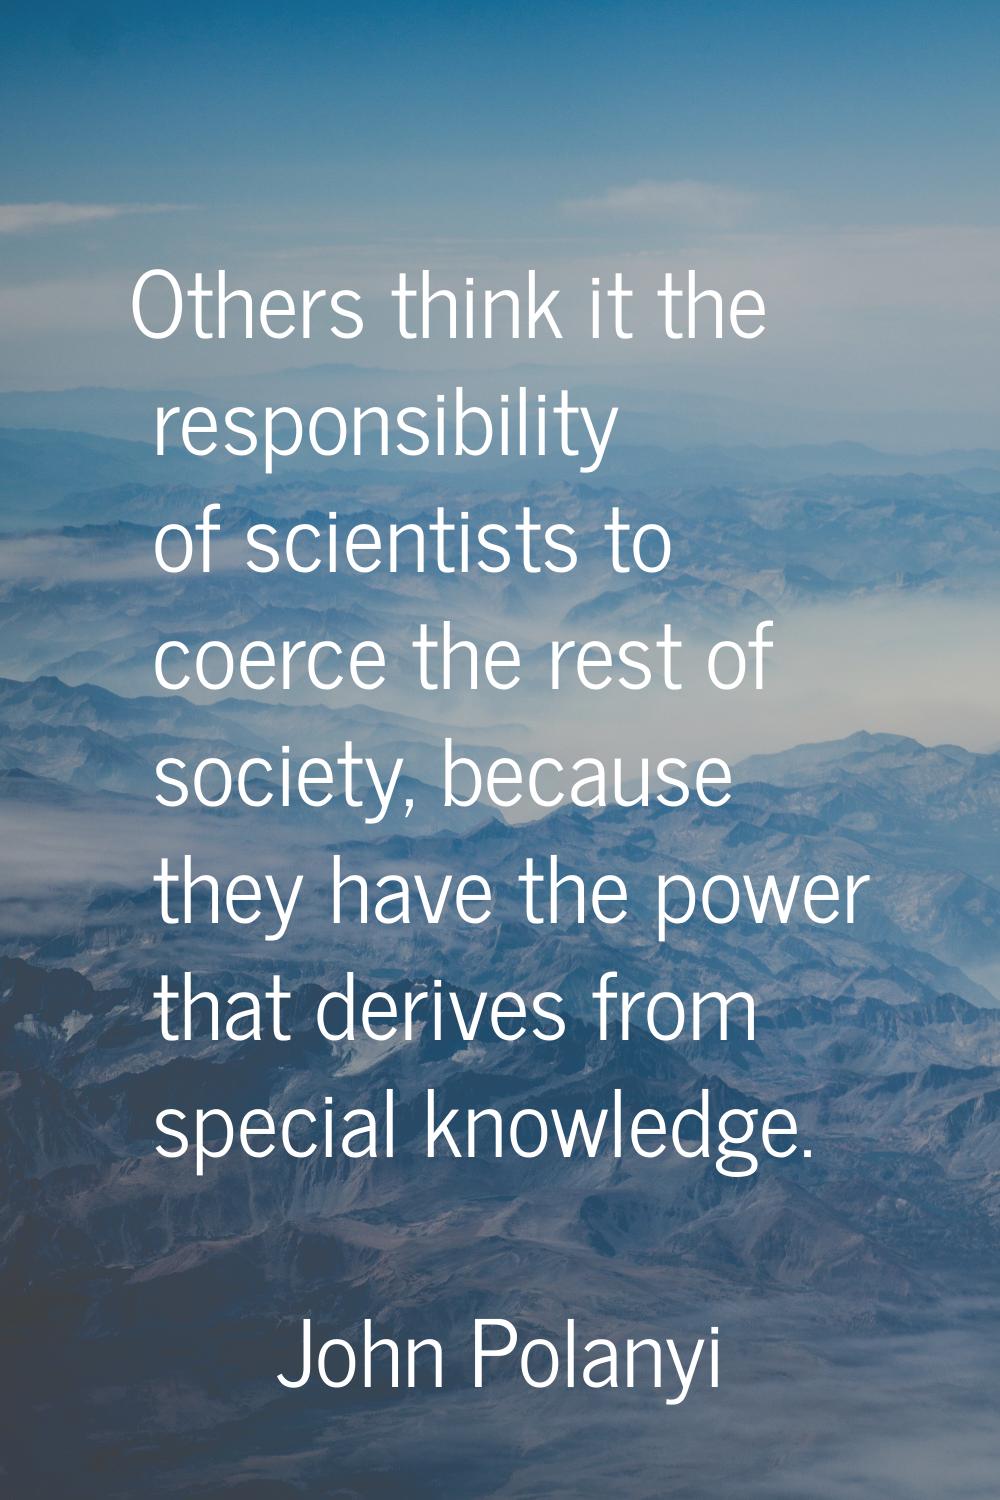 Others think it the responsibility of scientists to coerce the rest of society, because they have t